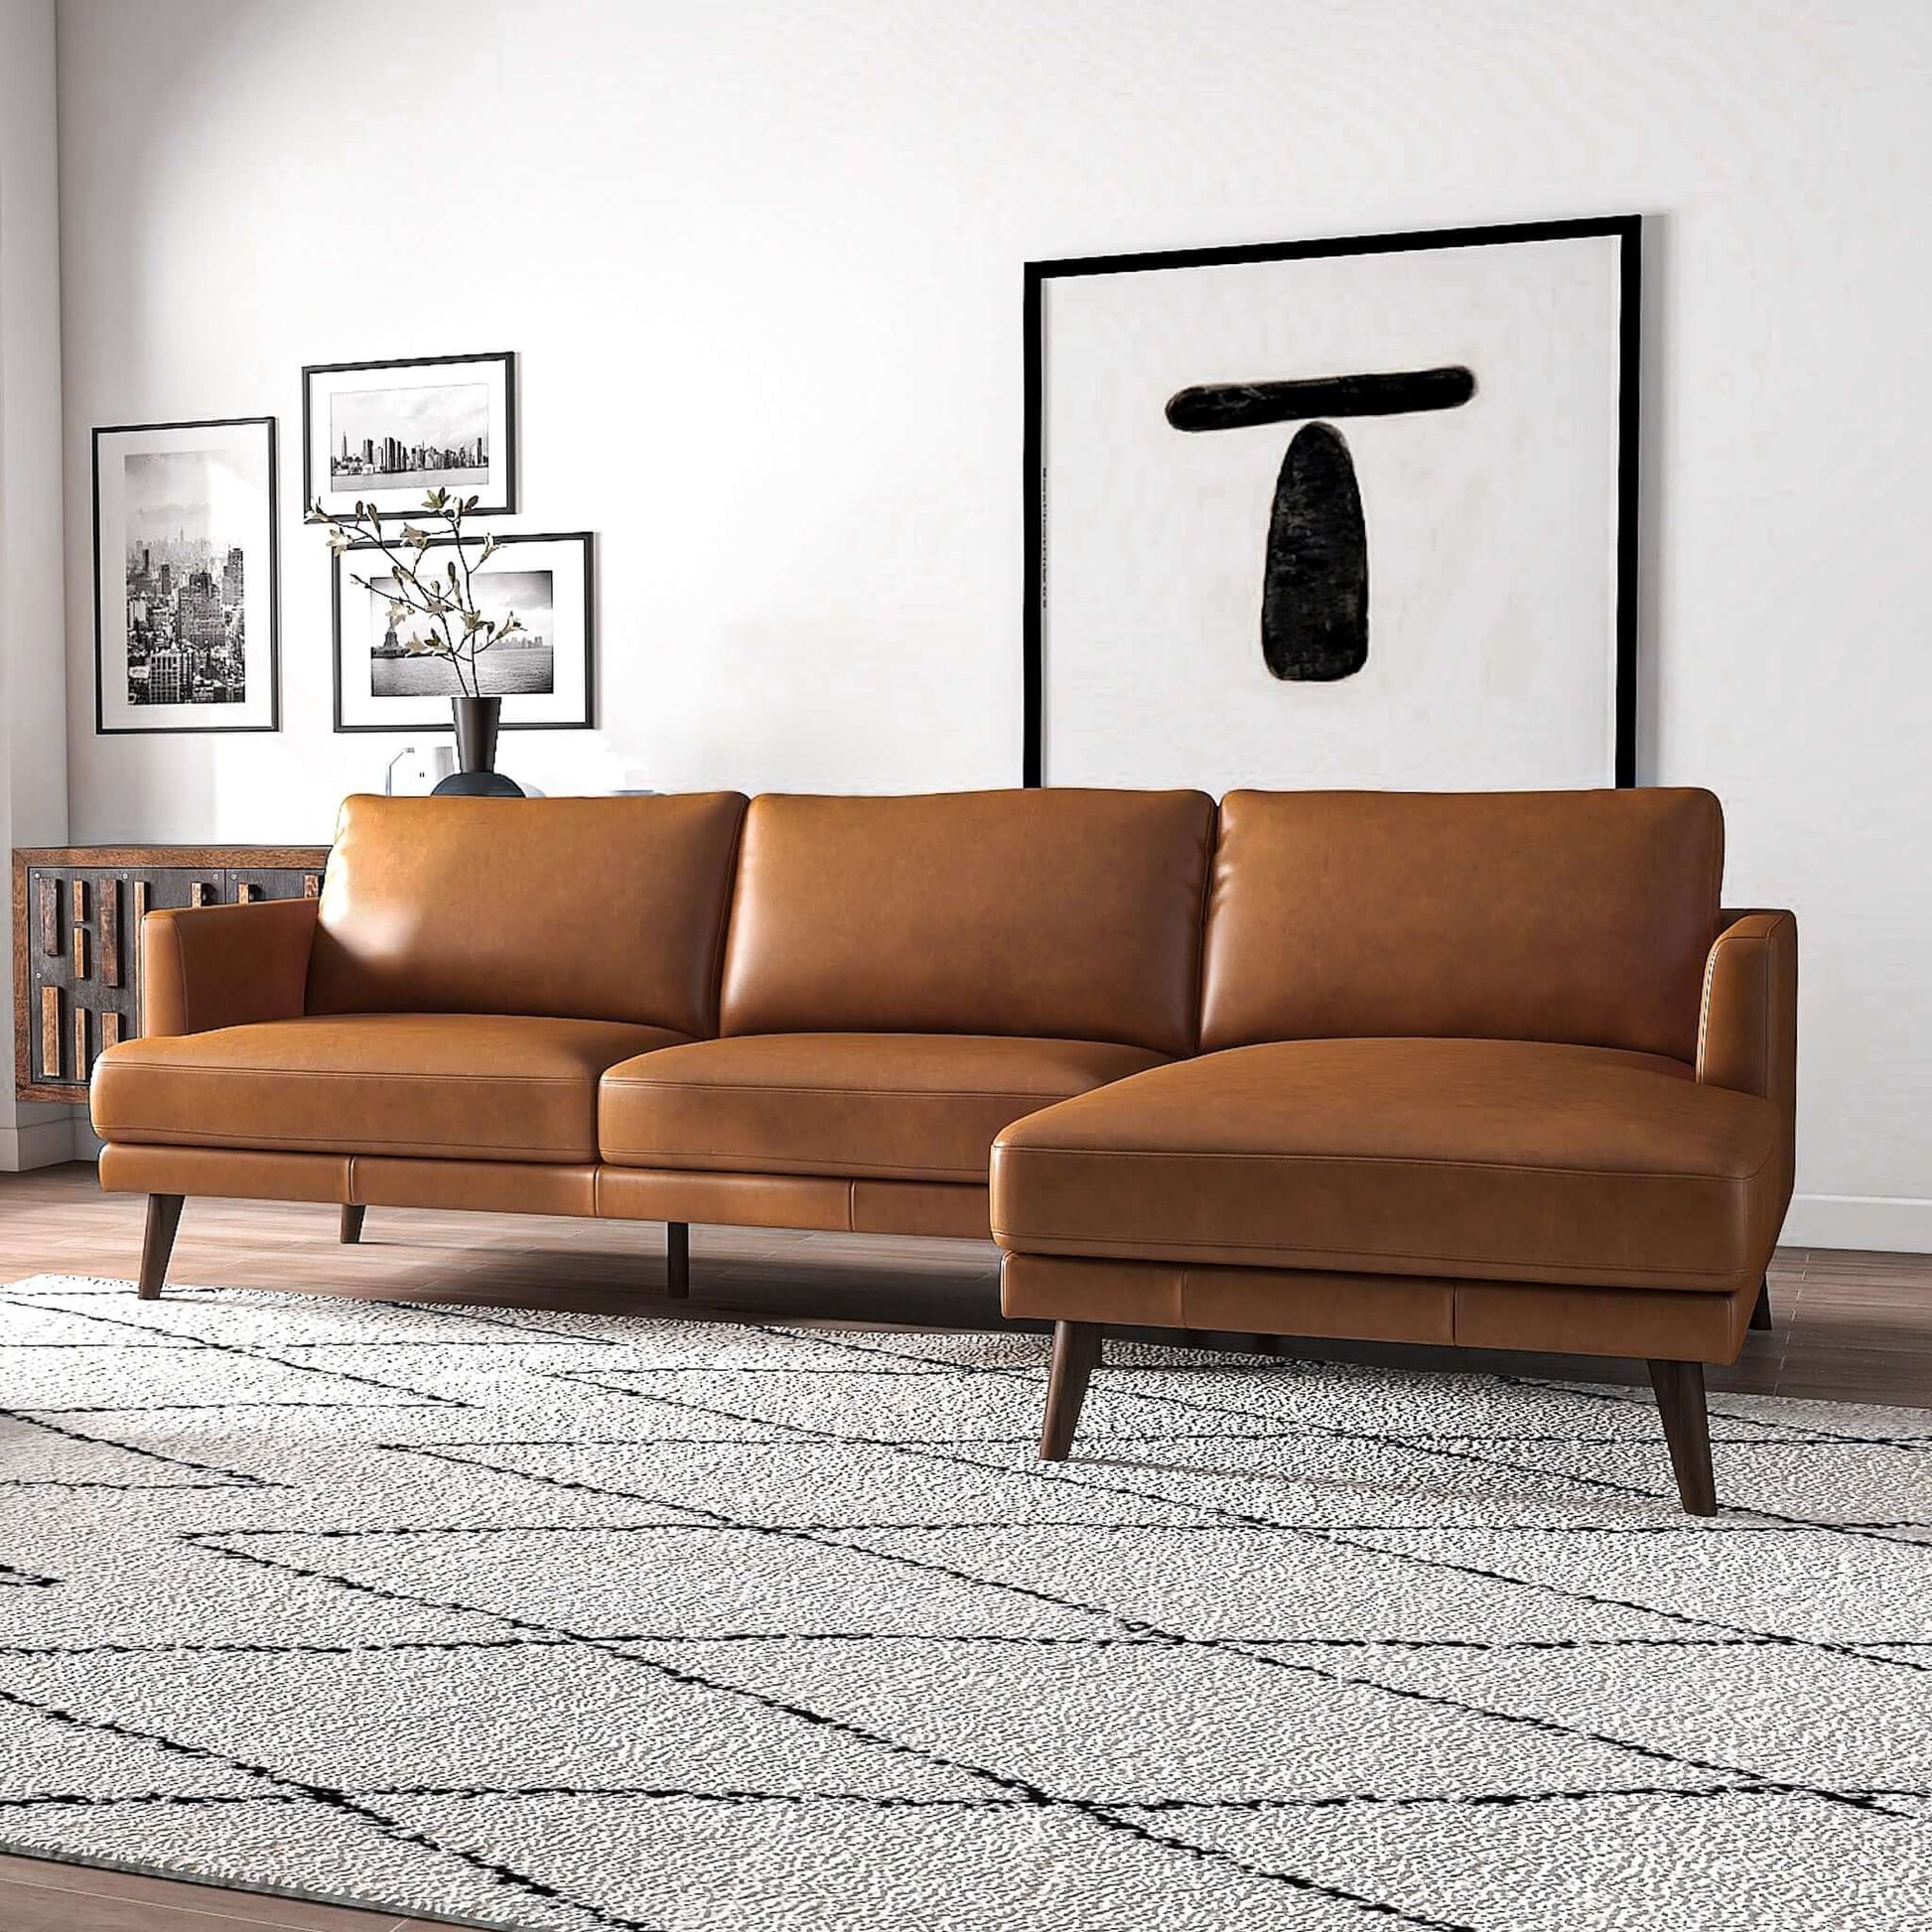 Ashcroft Furniture Co Lore Mid-Century Modern L-Shaped Genuine Leather Sectional in Tan